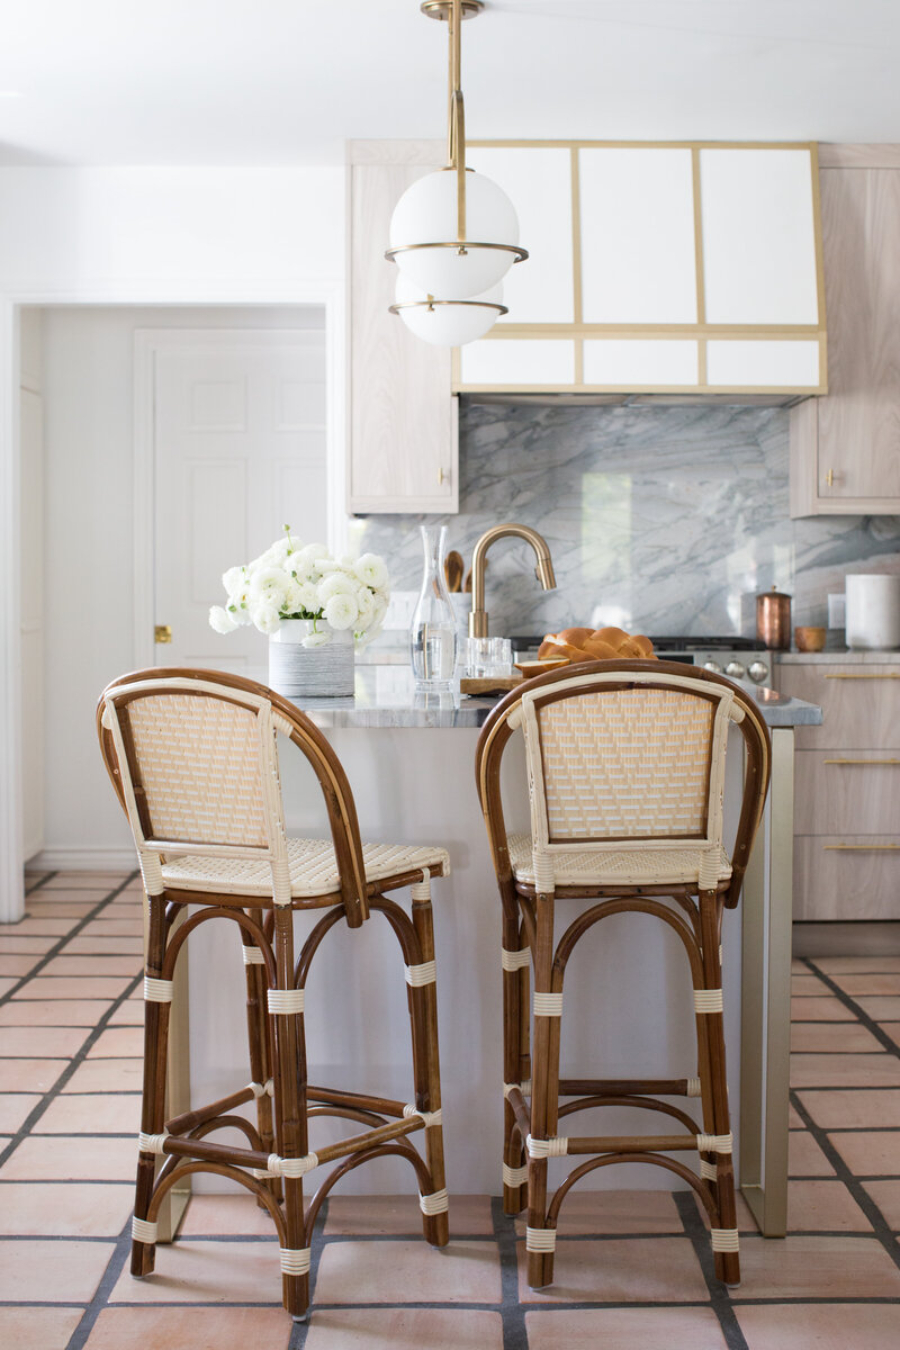 Interior Design Ideas From Marie Flanigan. This Kitchen is decorated in neutral colors. The floor has a geometric pattern. interior design ideas Interior Design Ideas From Marie Flanigan Interior Design Ideas From Marie Flanigan Port